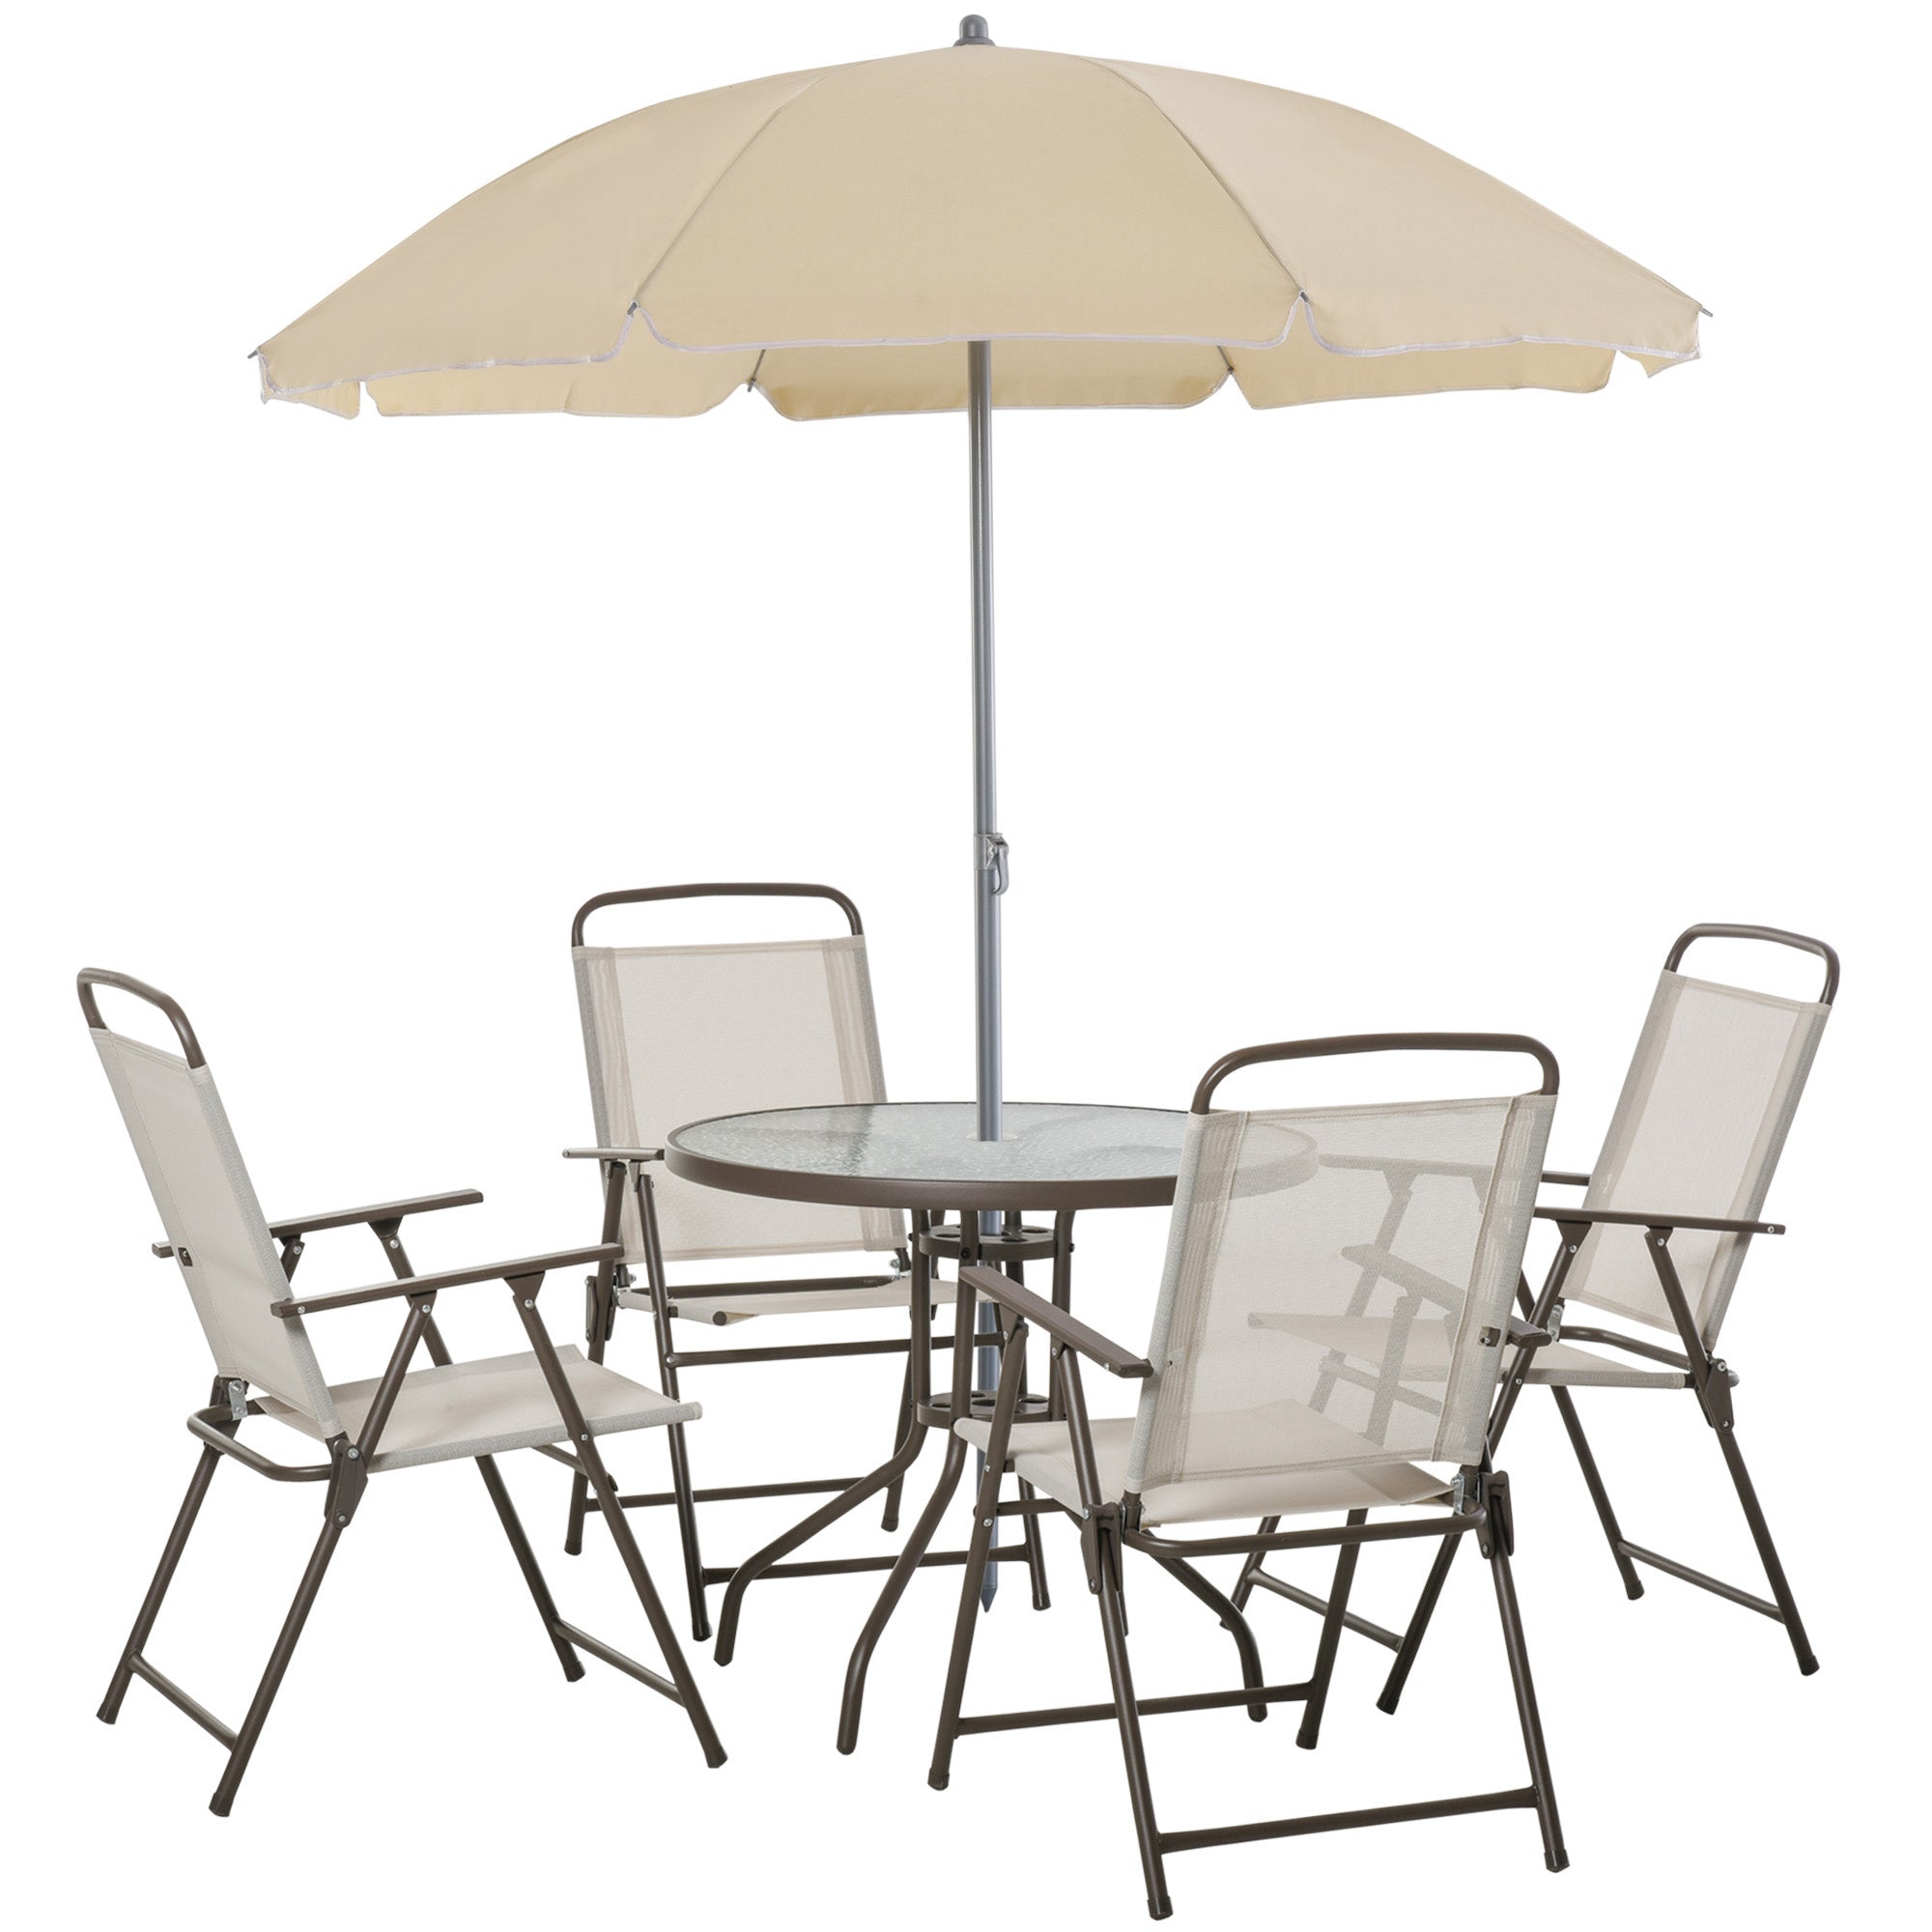 Outsunny 6PC Garden Dining Set Outdoor Furniture Folding Chairs Table Parasol  | TJ Hughes